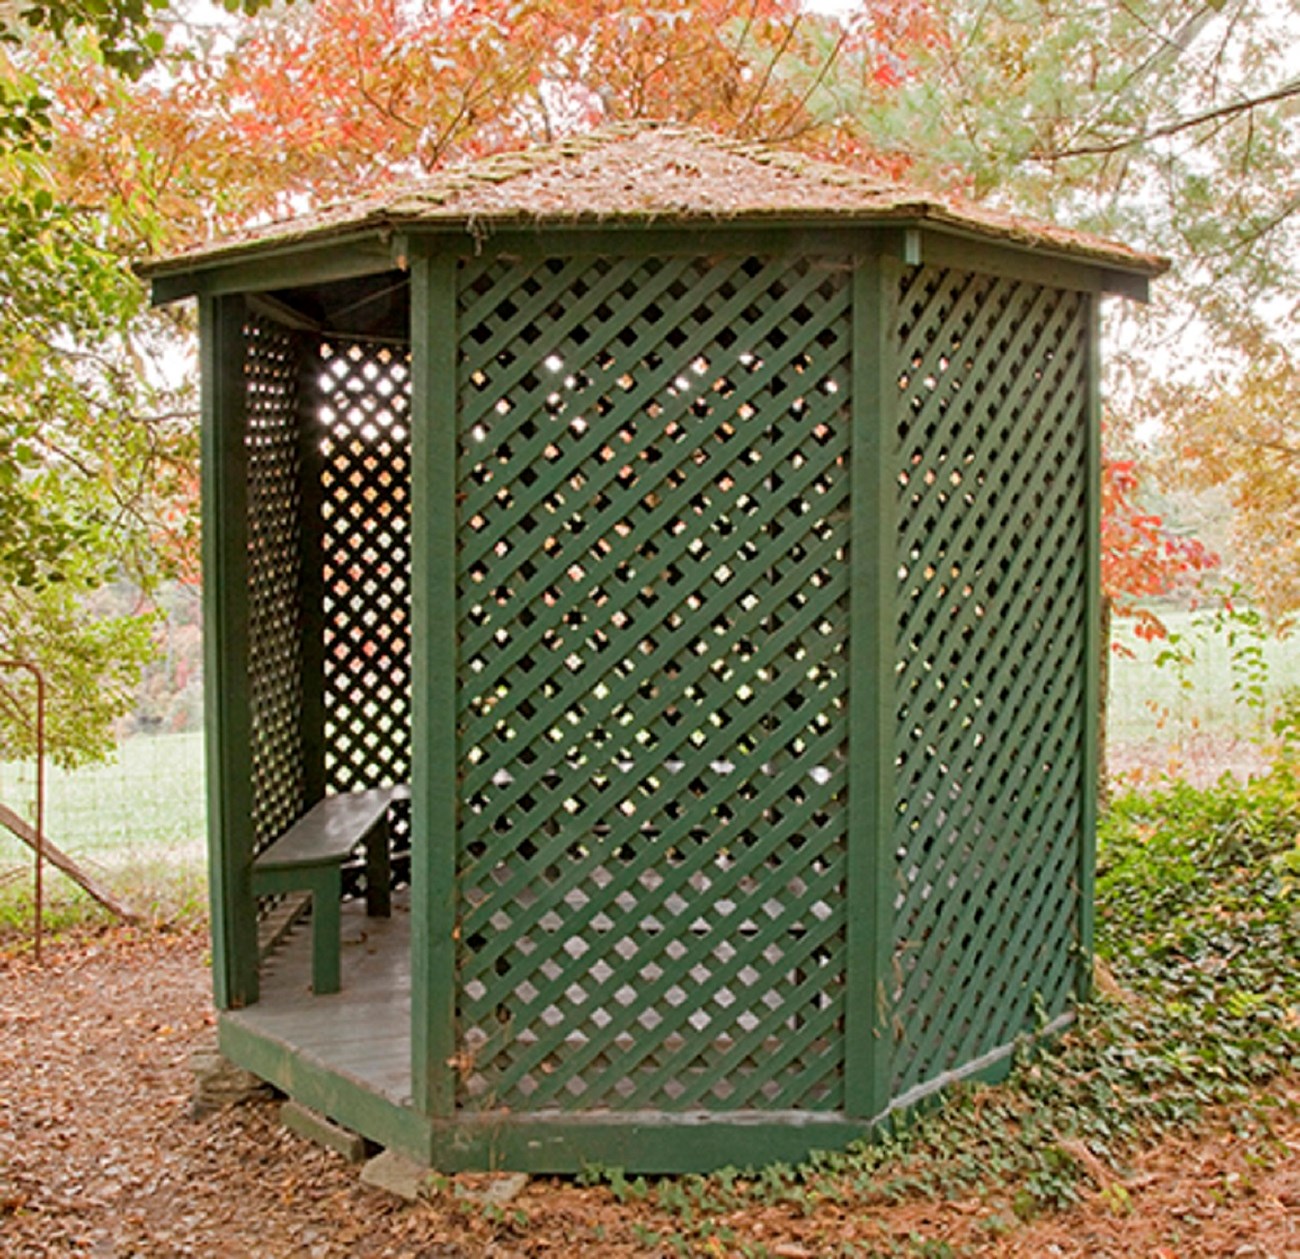 A small octagonal shaped building with green lattice and benches inside